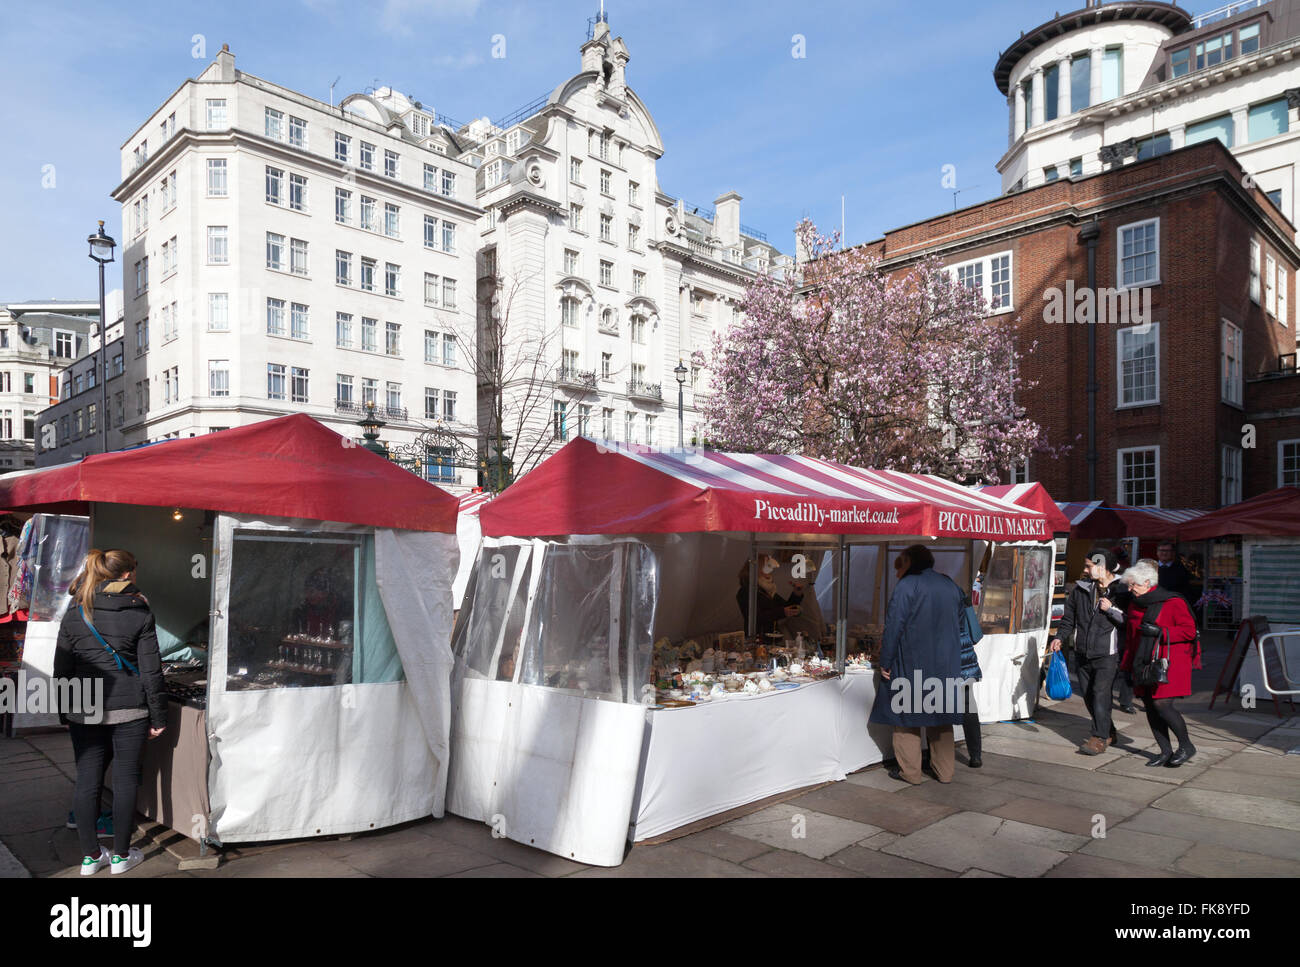 People shopping at Piccadilly market, St James Church, London UK Stock Photo